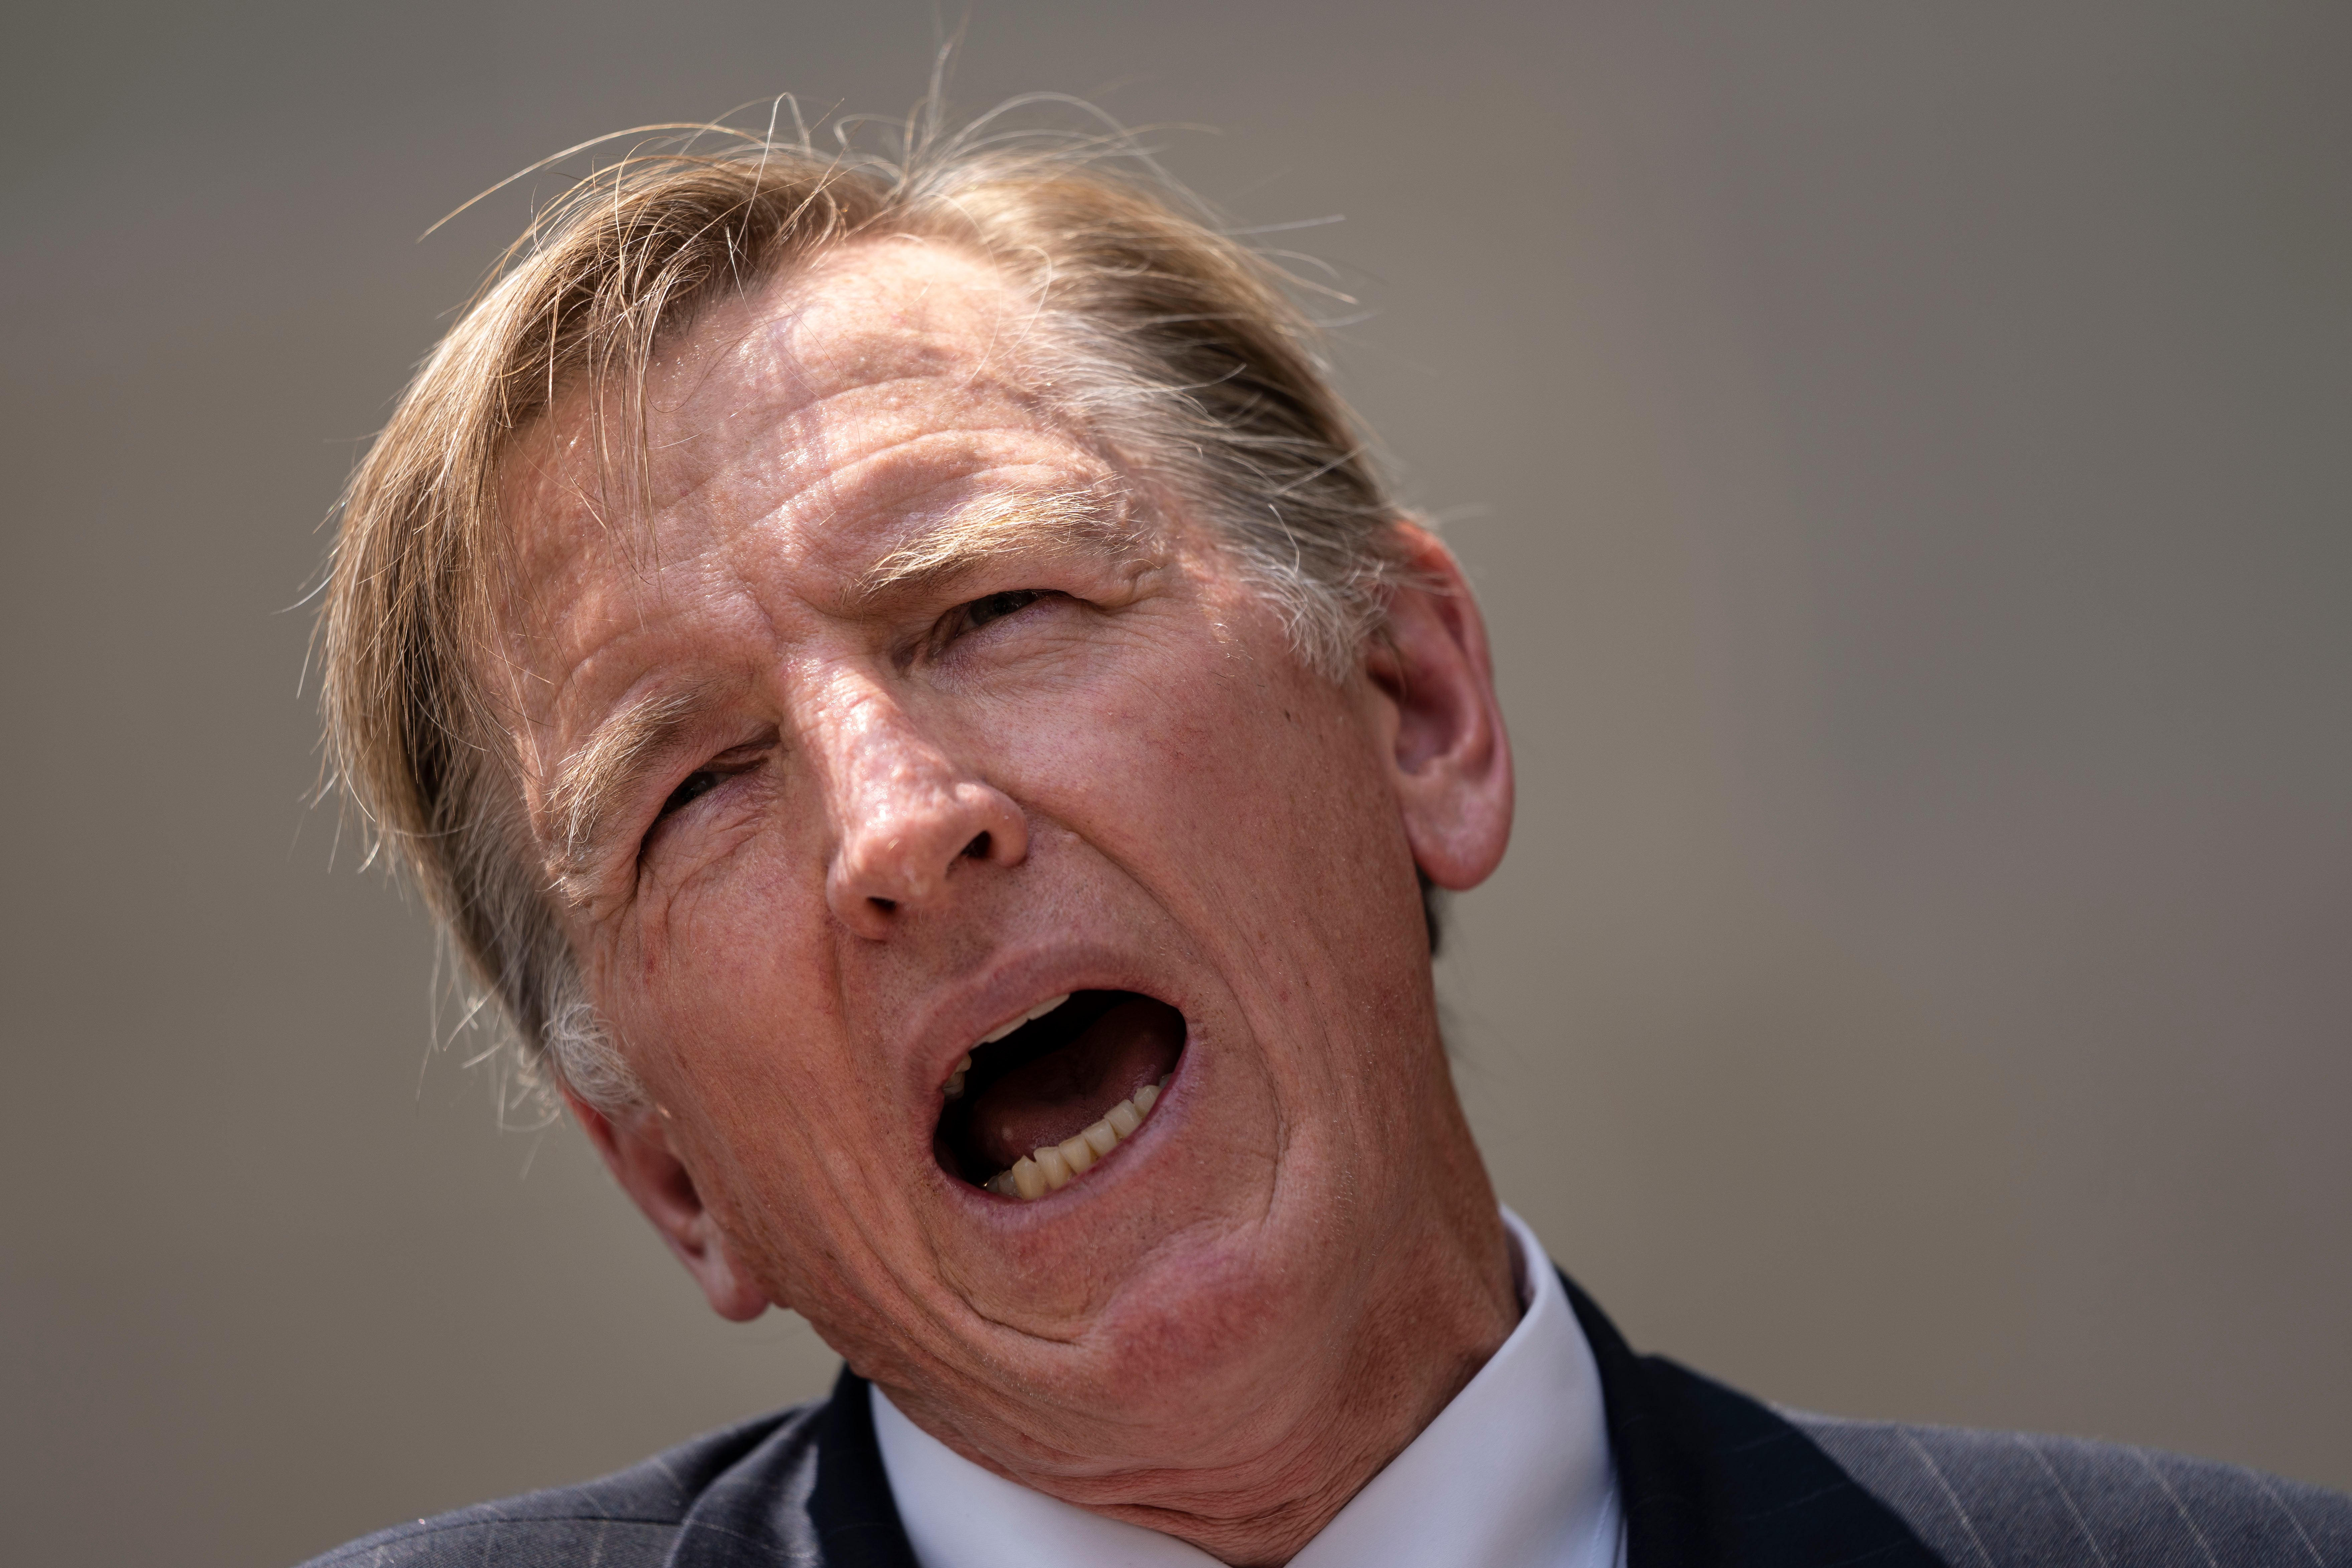 File: Paul Gosar speaks during a news conference outside the US Department of Justice on 27 July 2021 in Washington DC